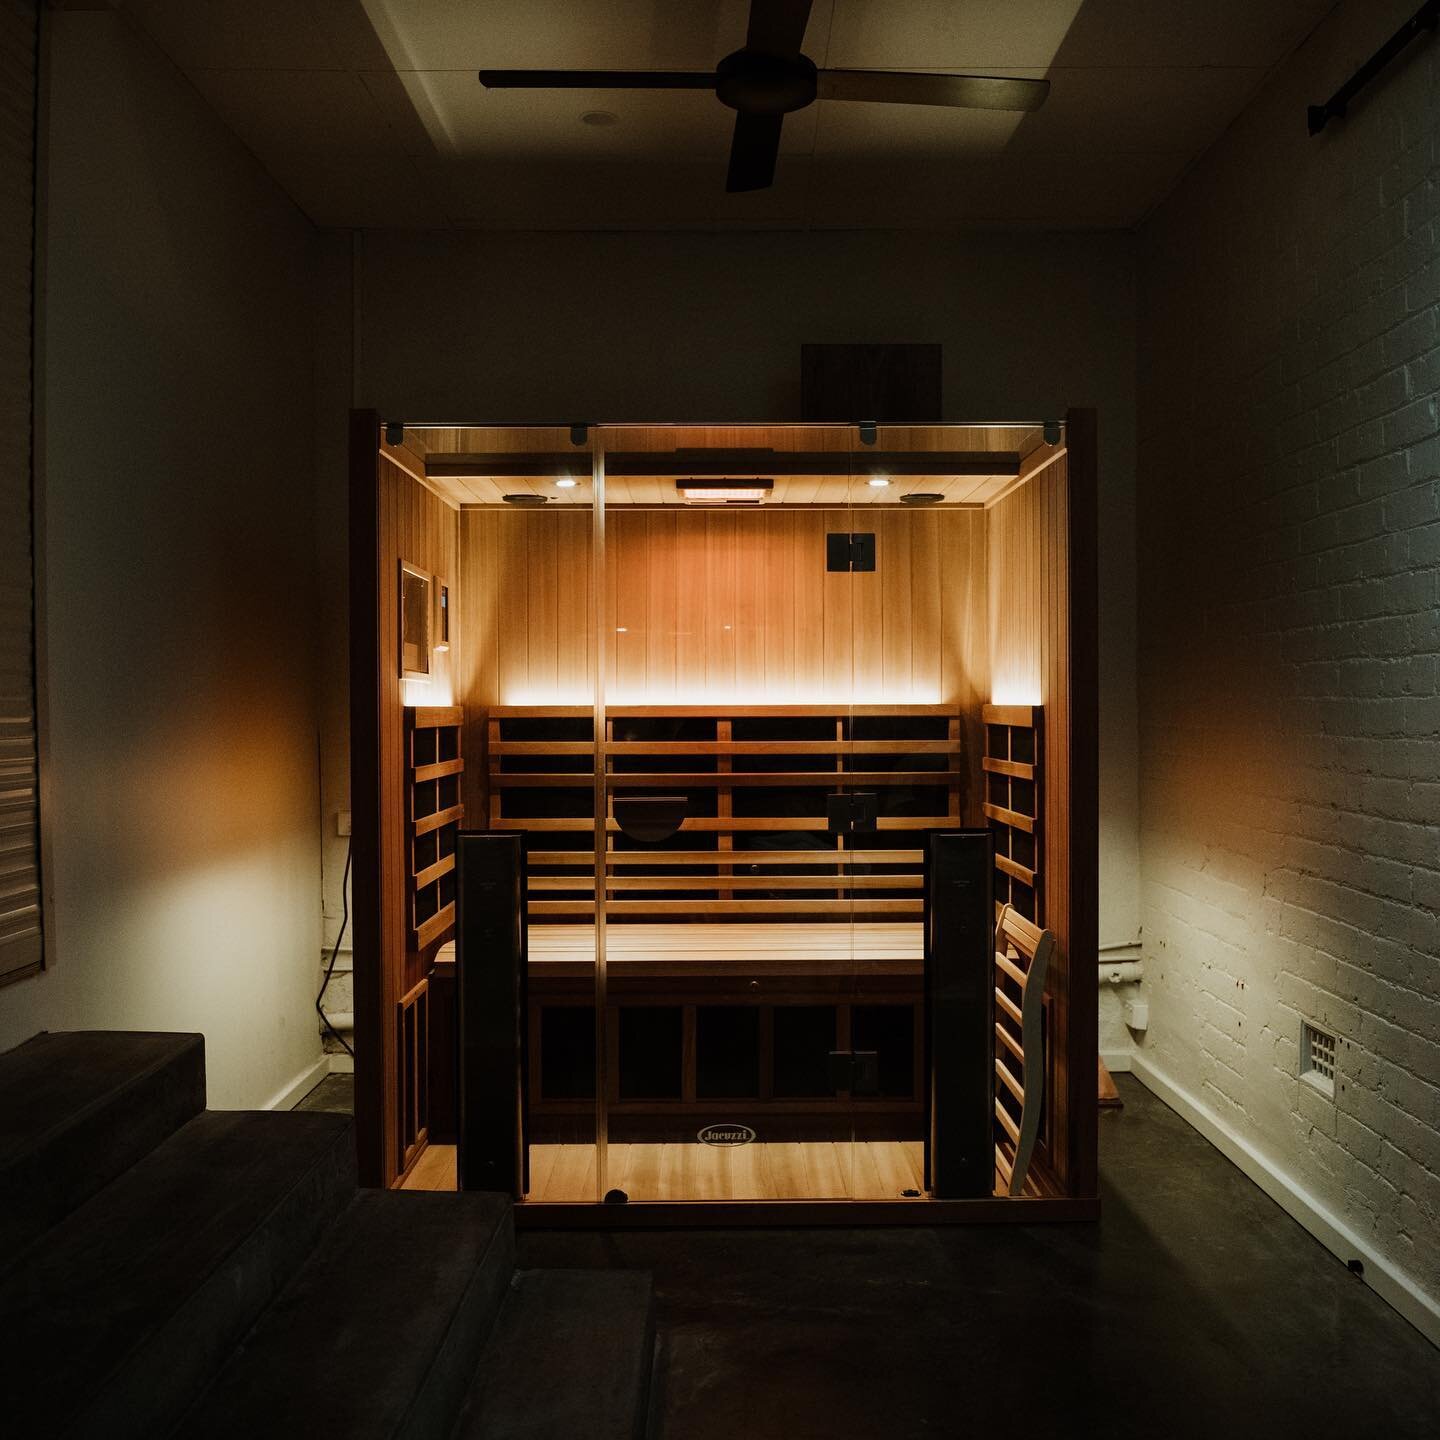 Infrared sauna bookings available at #cntrespace

Despite the heat currently in Perth, the sauna actually makes you feel good, rested and fresh.